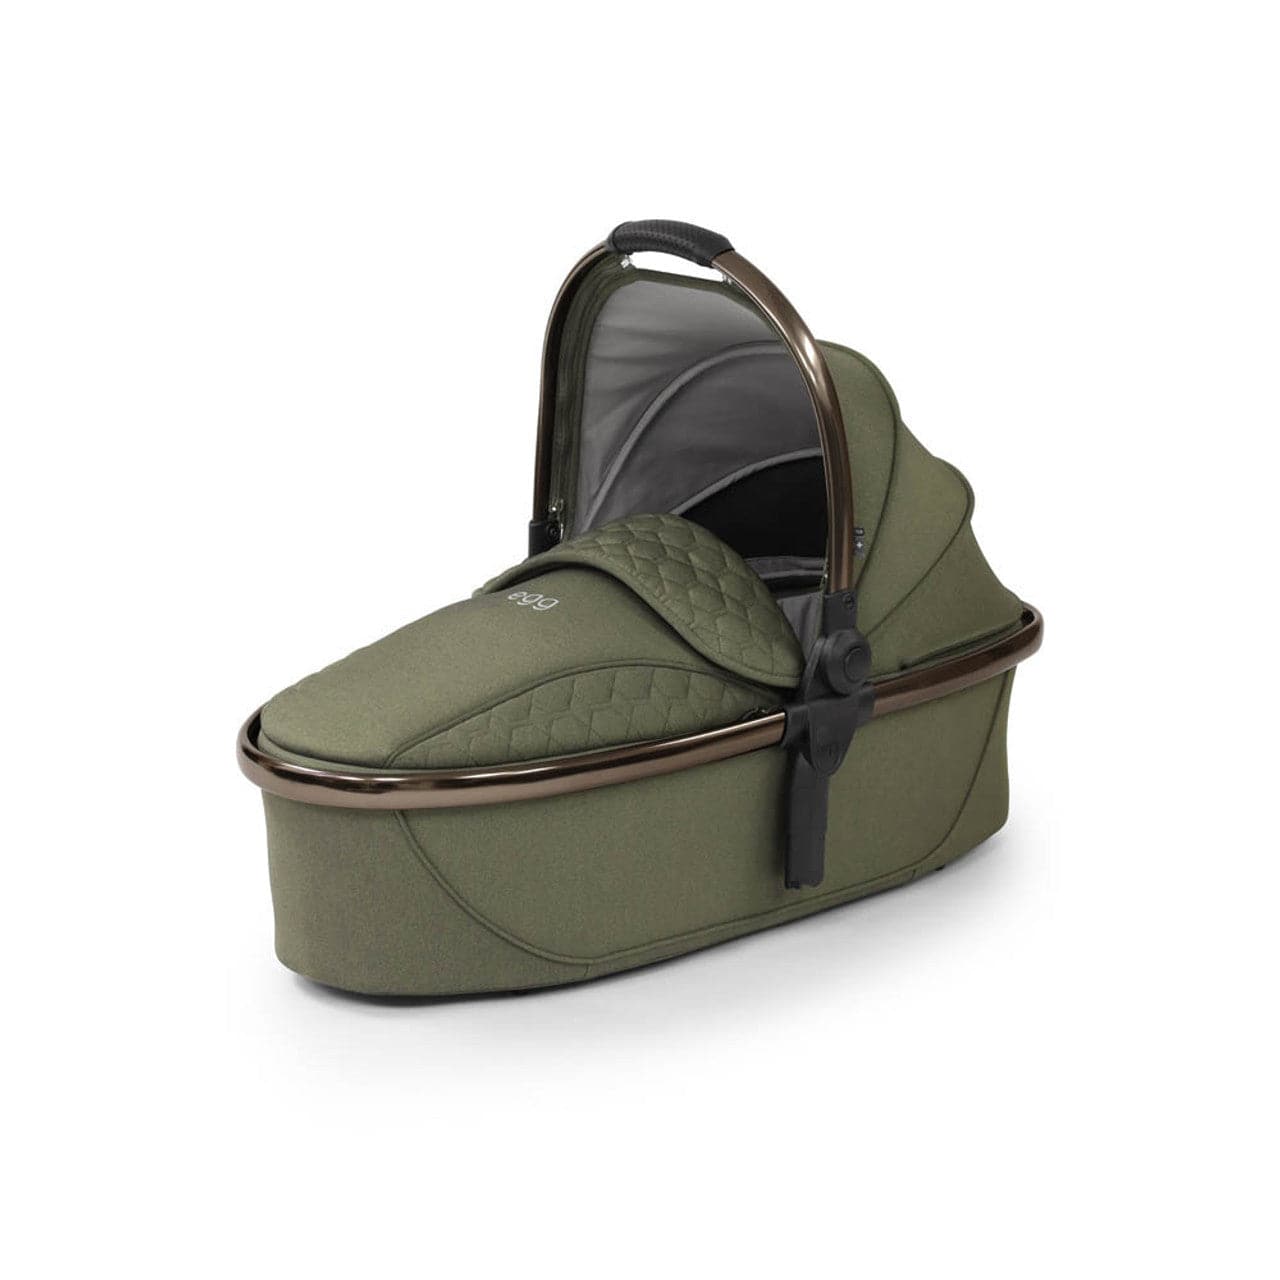 Egg® 2 Snuggle Pushchair Package - Hunter Green -  | For Your Little One